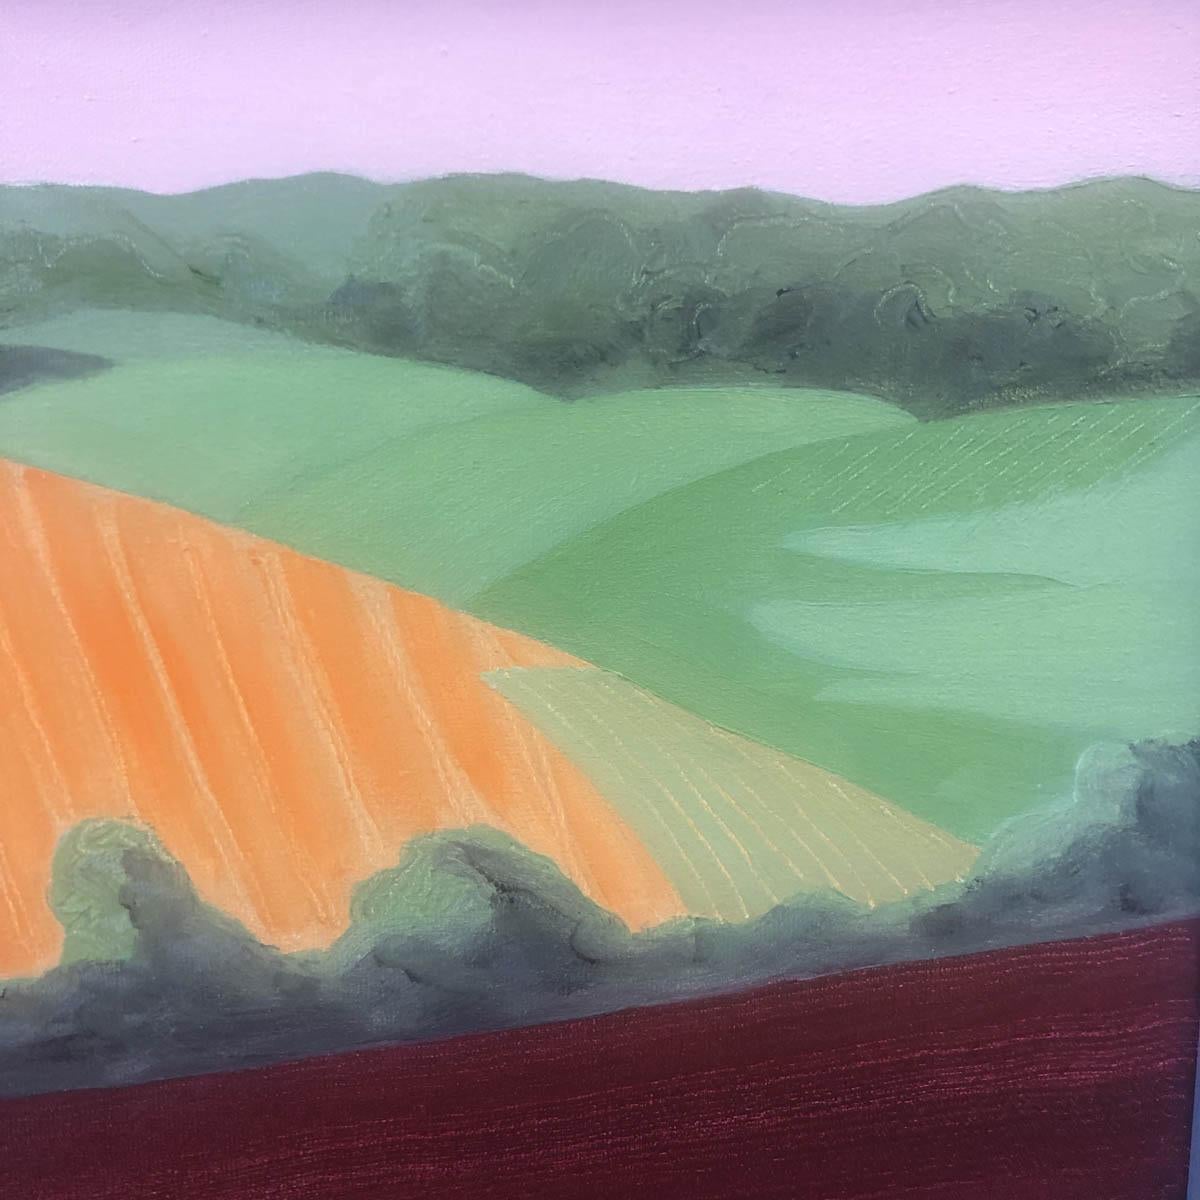 Early morning over Weald of Kent BY CHRISTO SHARPE, Original Contemporary Art For Sale 1